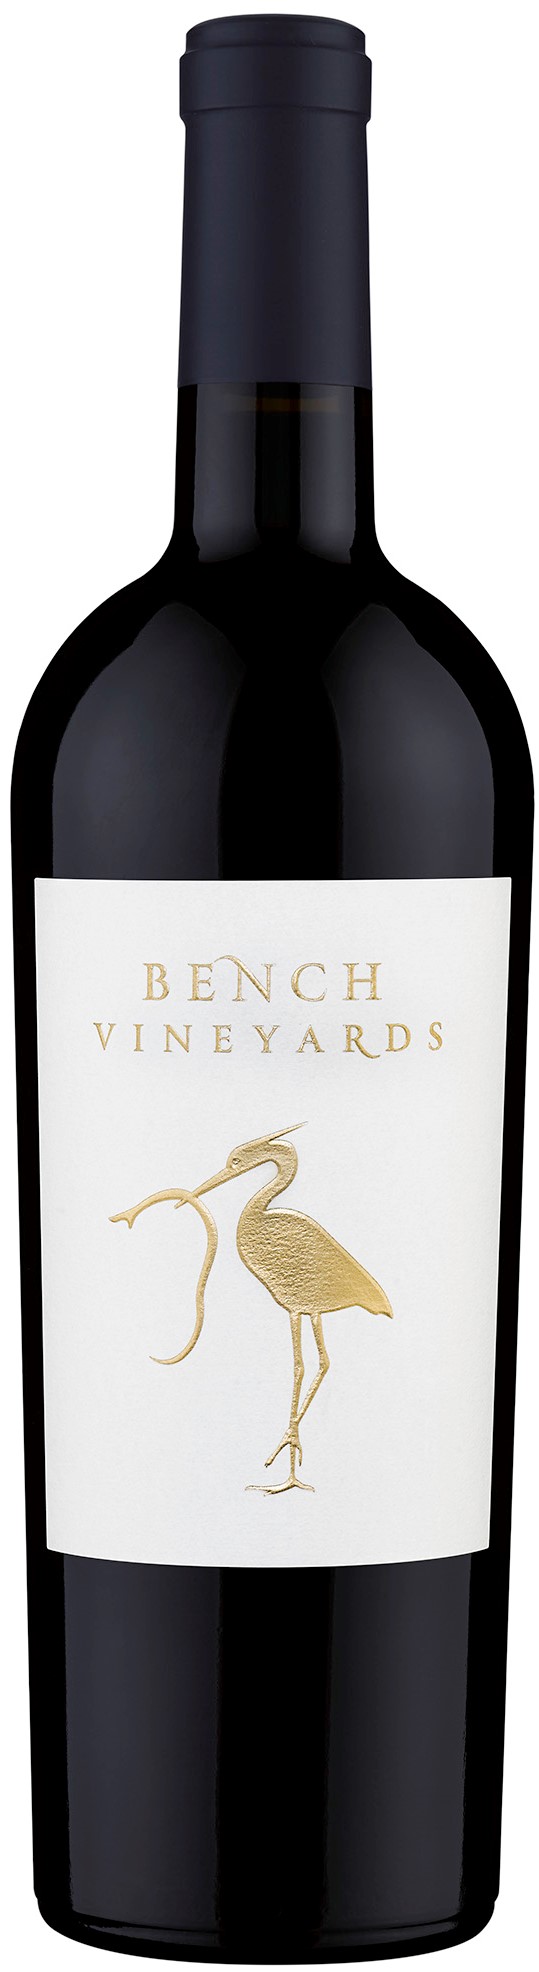 Product Image for 2019 Bench Vineyards Cabernet Sauvignon, SLD